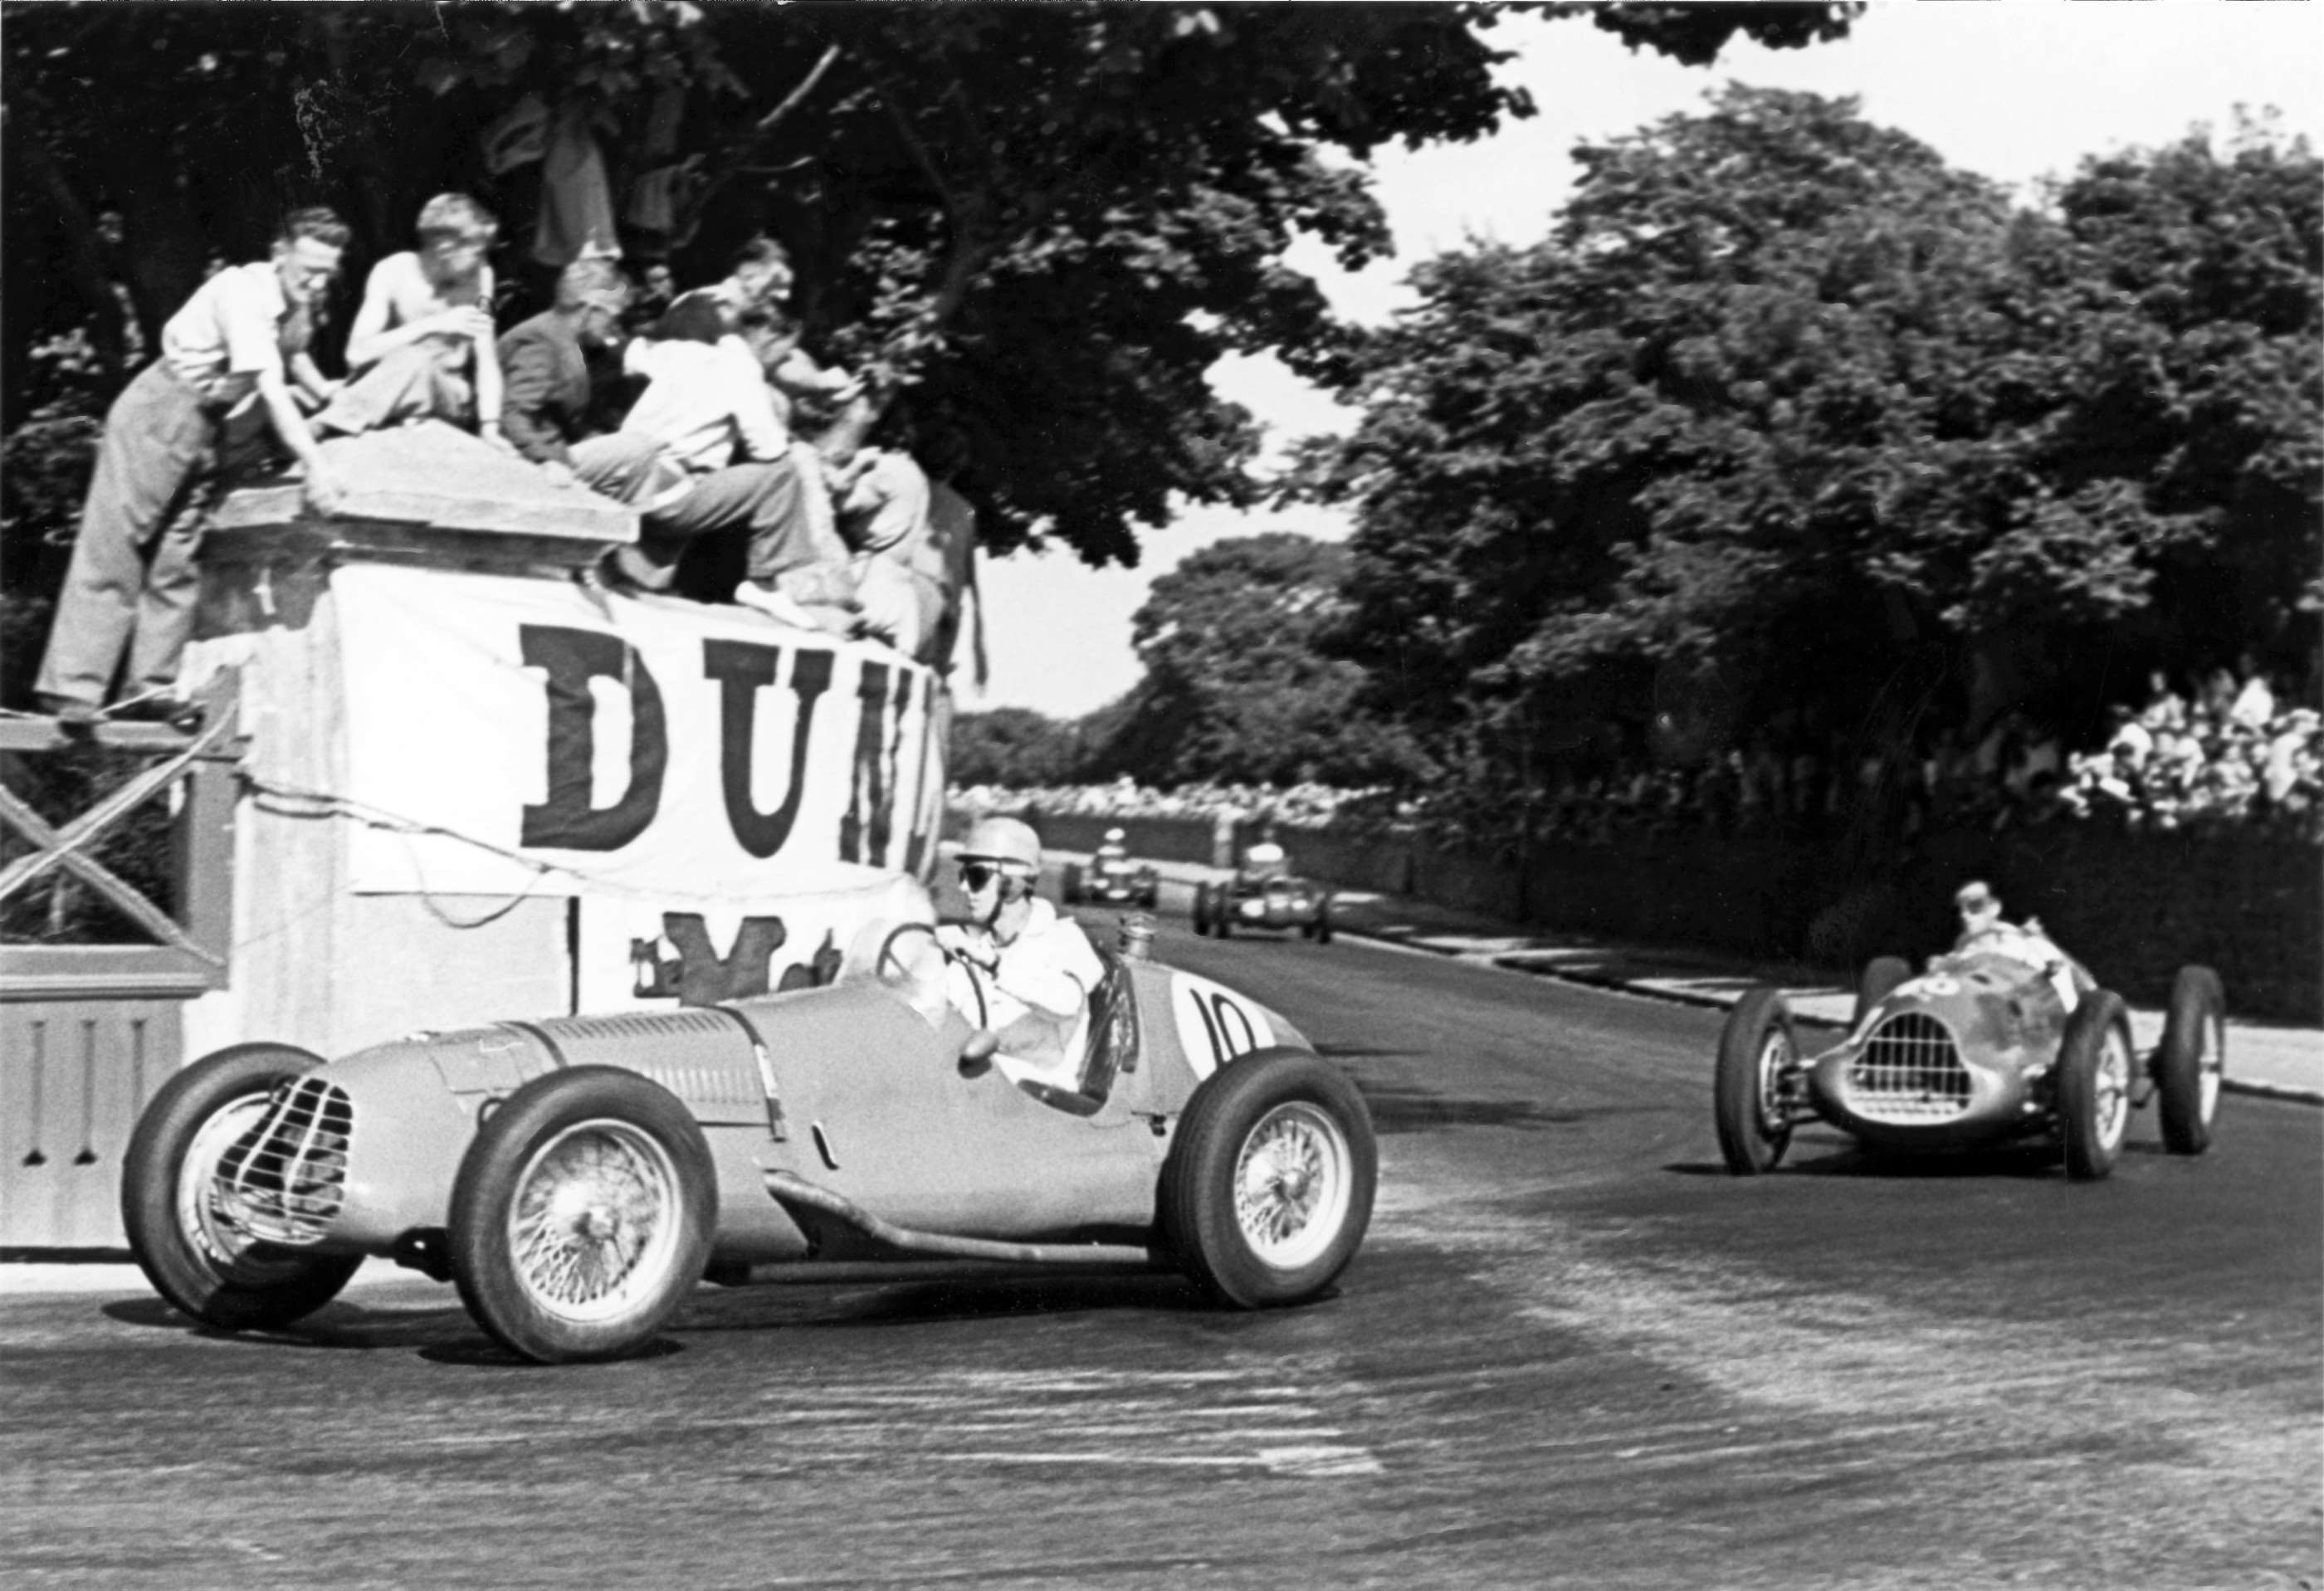 1947 British Empire Trophy, Douglas, Isle of Man - David Hampshire in Reg Parnell’s ‘Challenger’ with Delage engine and another rarity - one of the two E-Type ERAs built 